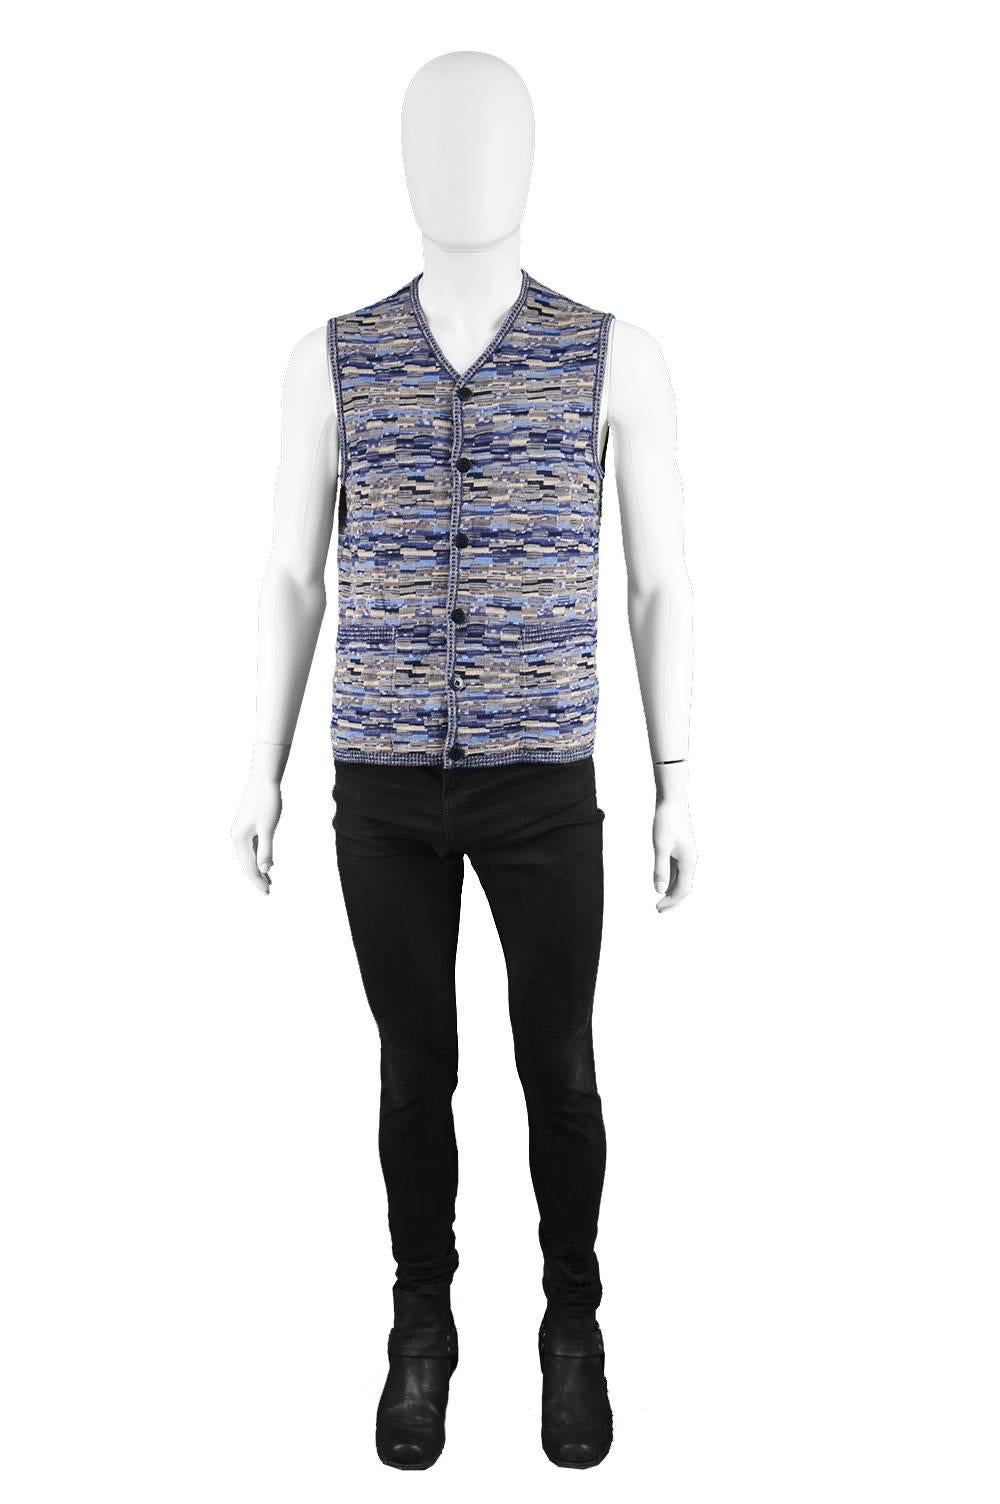 Missoni Men's Vintage Blue Wool & Silk Textured Knit Sleeveless Cardigan, 1990s 

Size: Marked 48 which is roughly a men's Small to Medium. Please check measurements.
Chest - 40” / 101cm
Waist - 38” / 96cm
Length (Shoulder to Hem) - 23” /